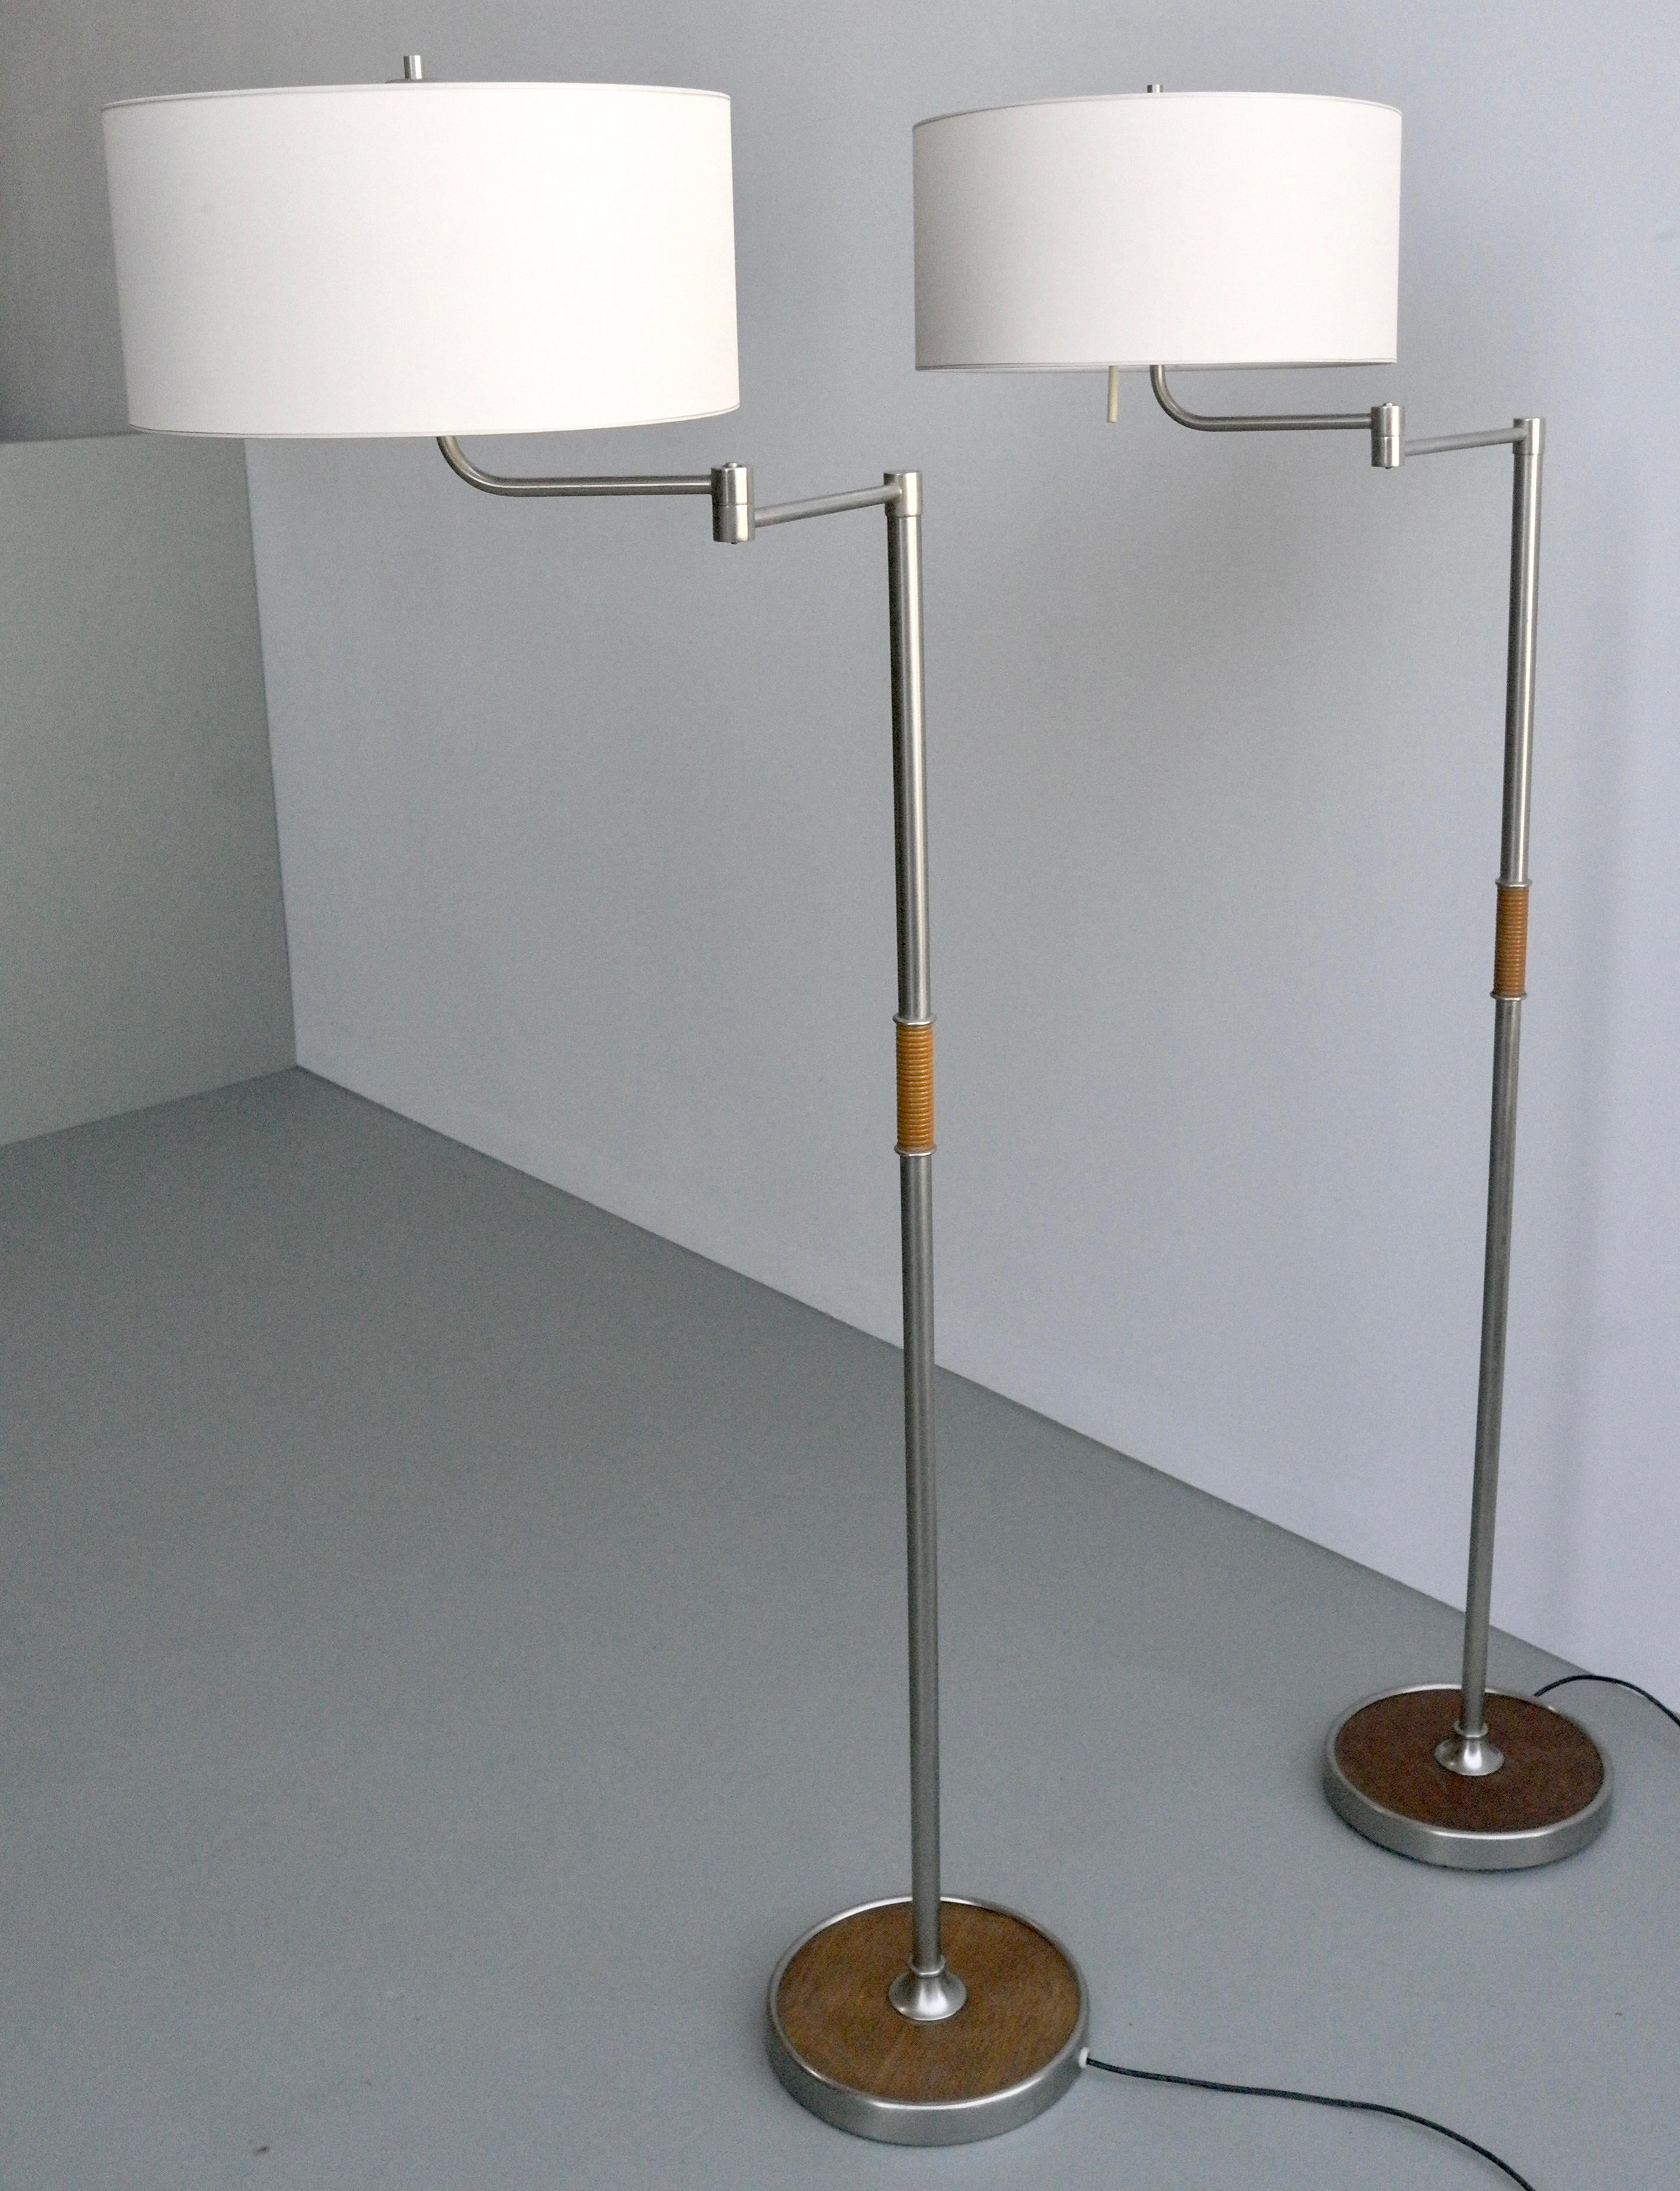 Pair of midcentury swing-arm floor lamps in metal with faux bamboo wood details.

Adjustable in many positions. Height 162cm, diameter base 30cm.